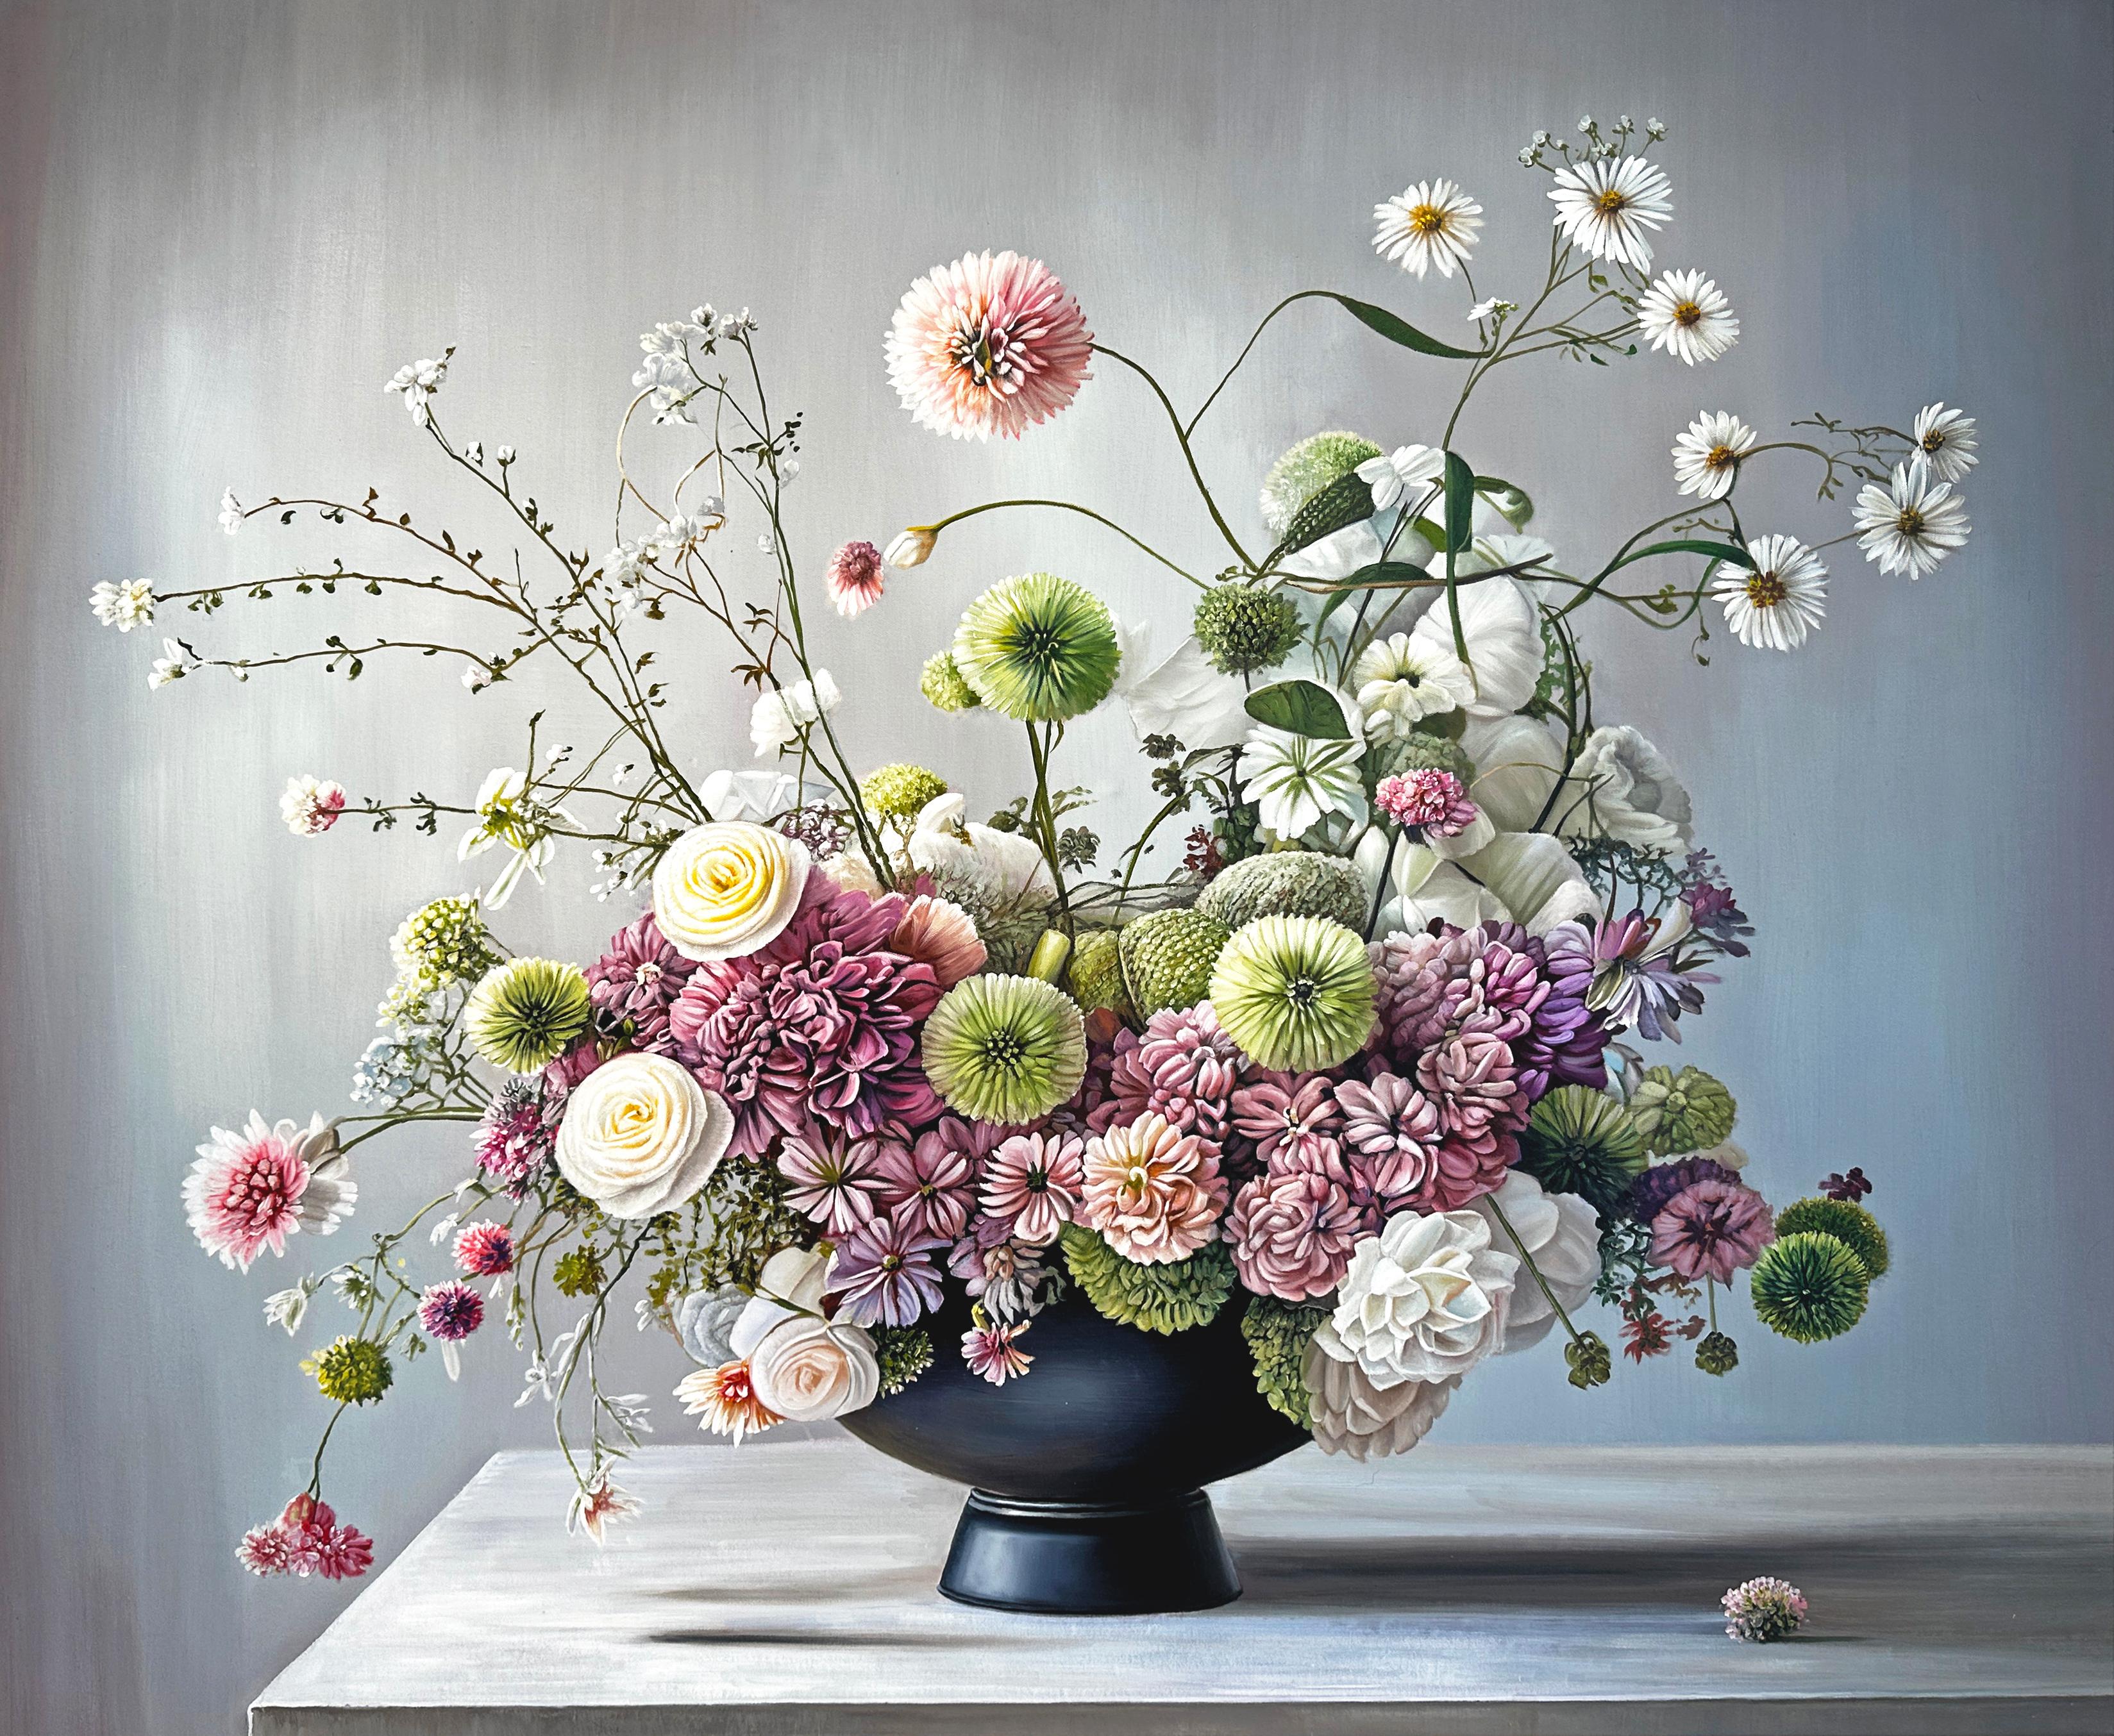 Let's go upward together by K Husslein Botanical Hyperrealistic Still life  - Painting by Katharina Husslein